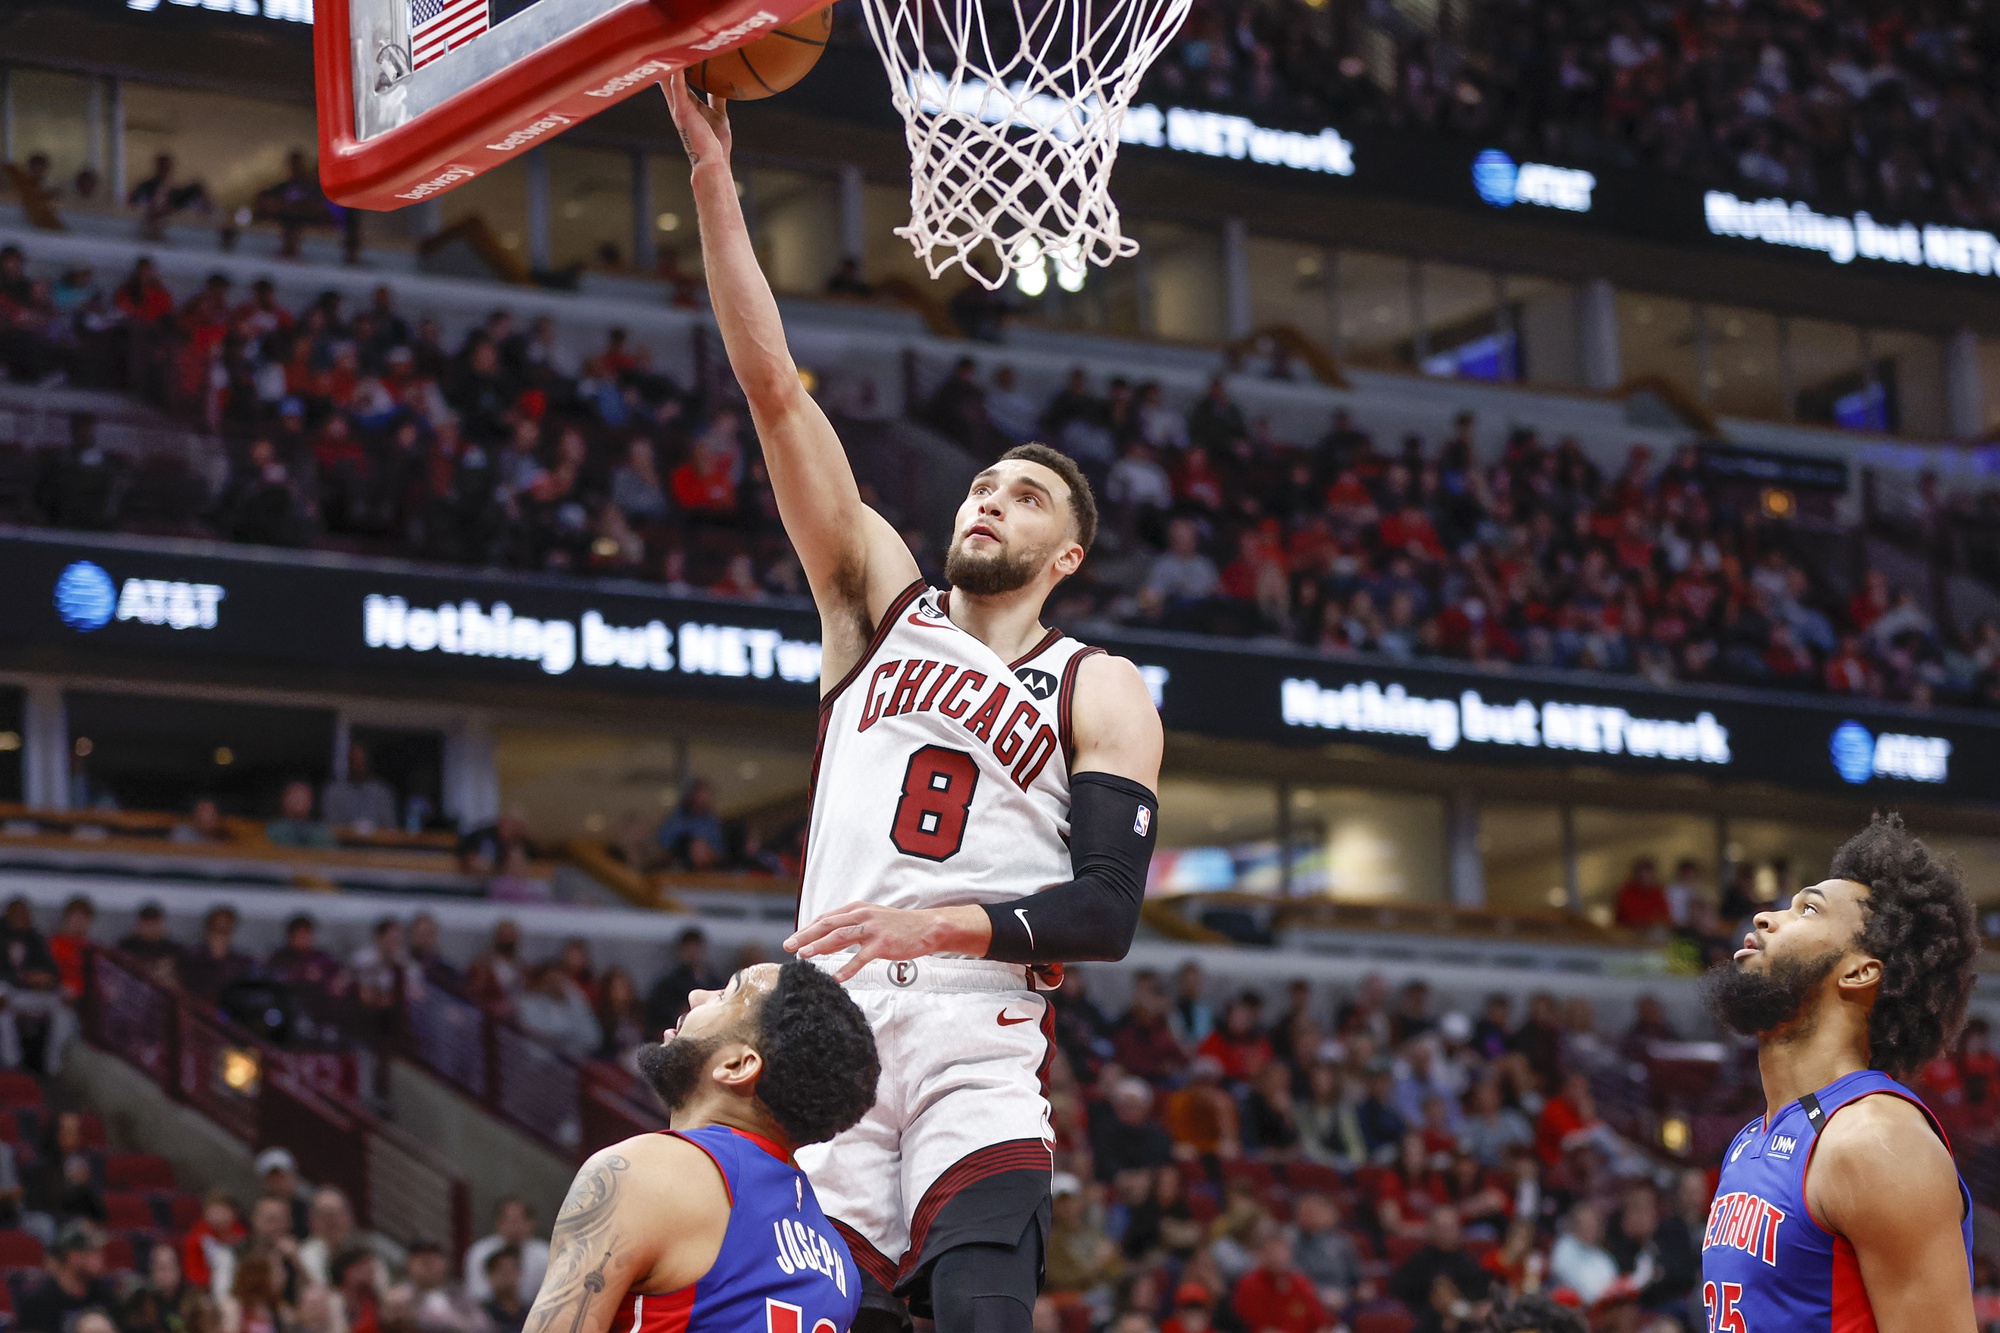 Apr 9, 2023; Chicago, Illinois, USA; Chicago Bulls guard Zach LaVine (8) goes to the basket against the Detroit Pistons during the first half at United Center. Mandatory Credit: Kamil Krzaczynski-USA TODAY Sports